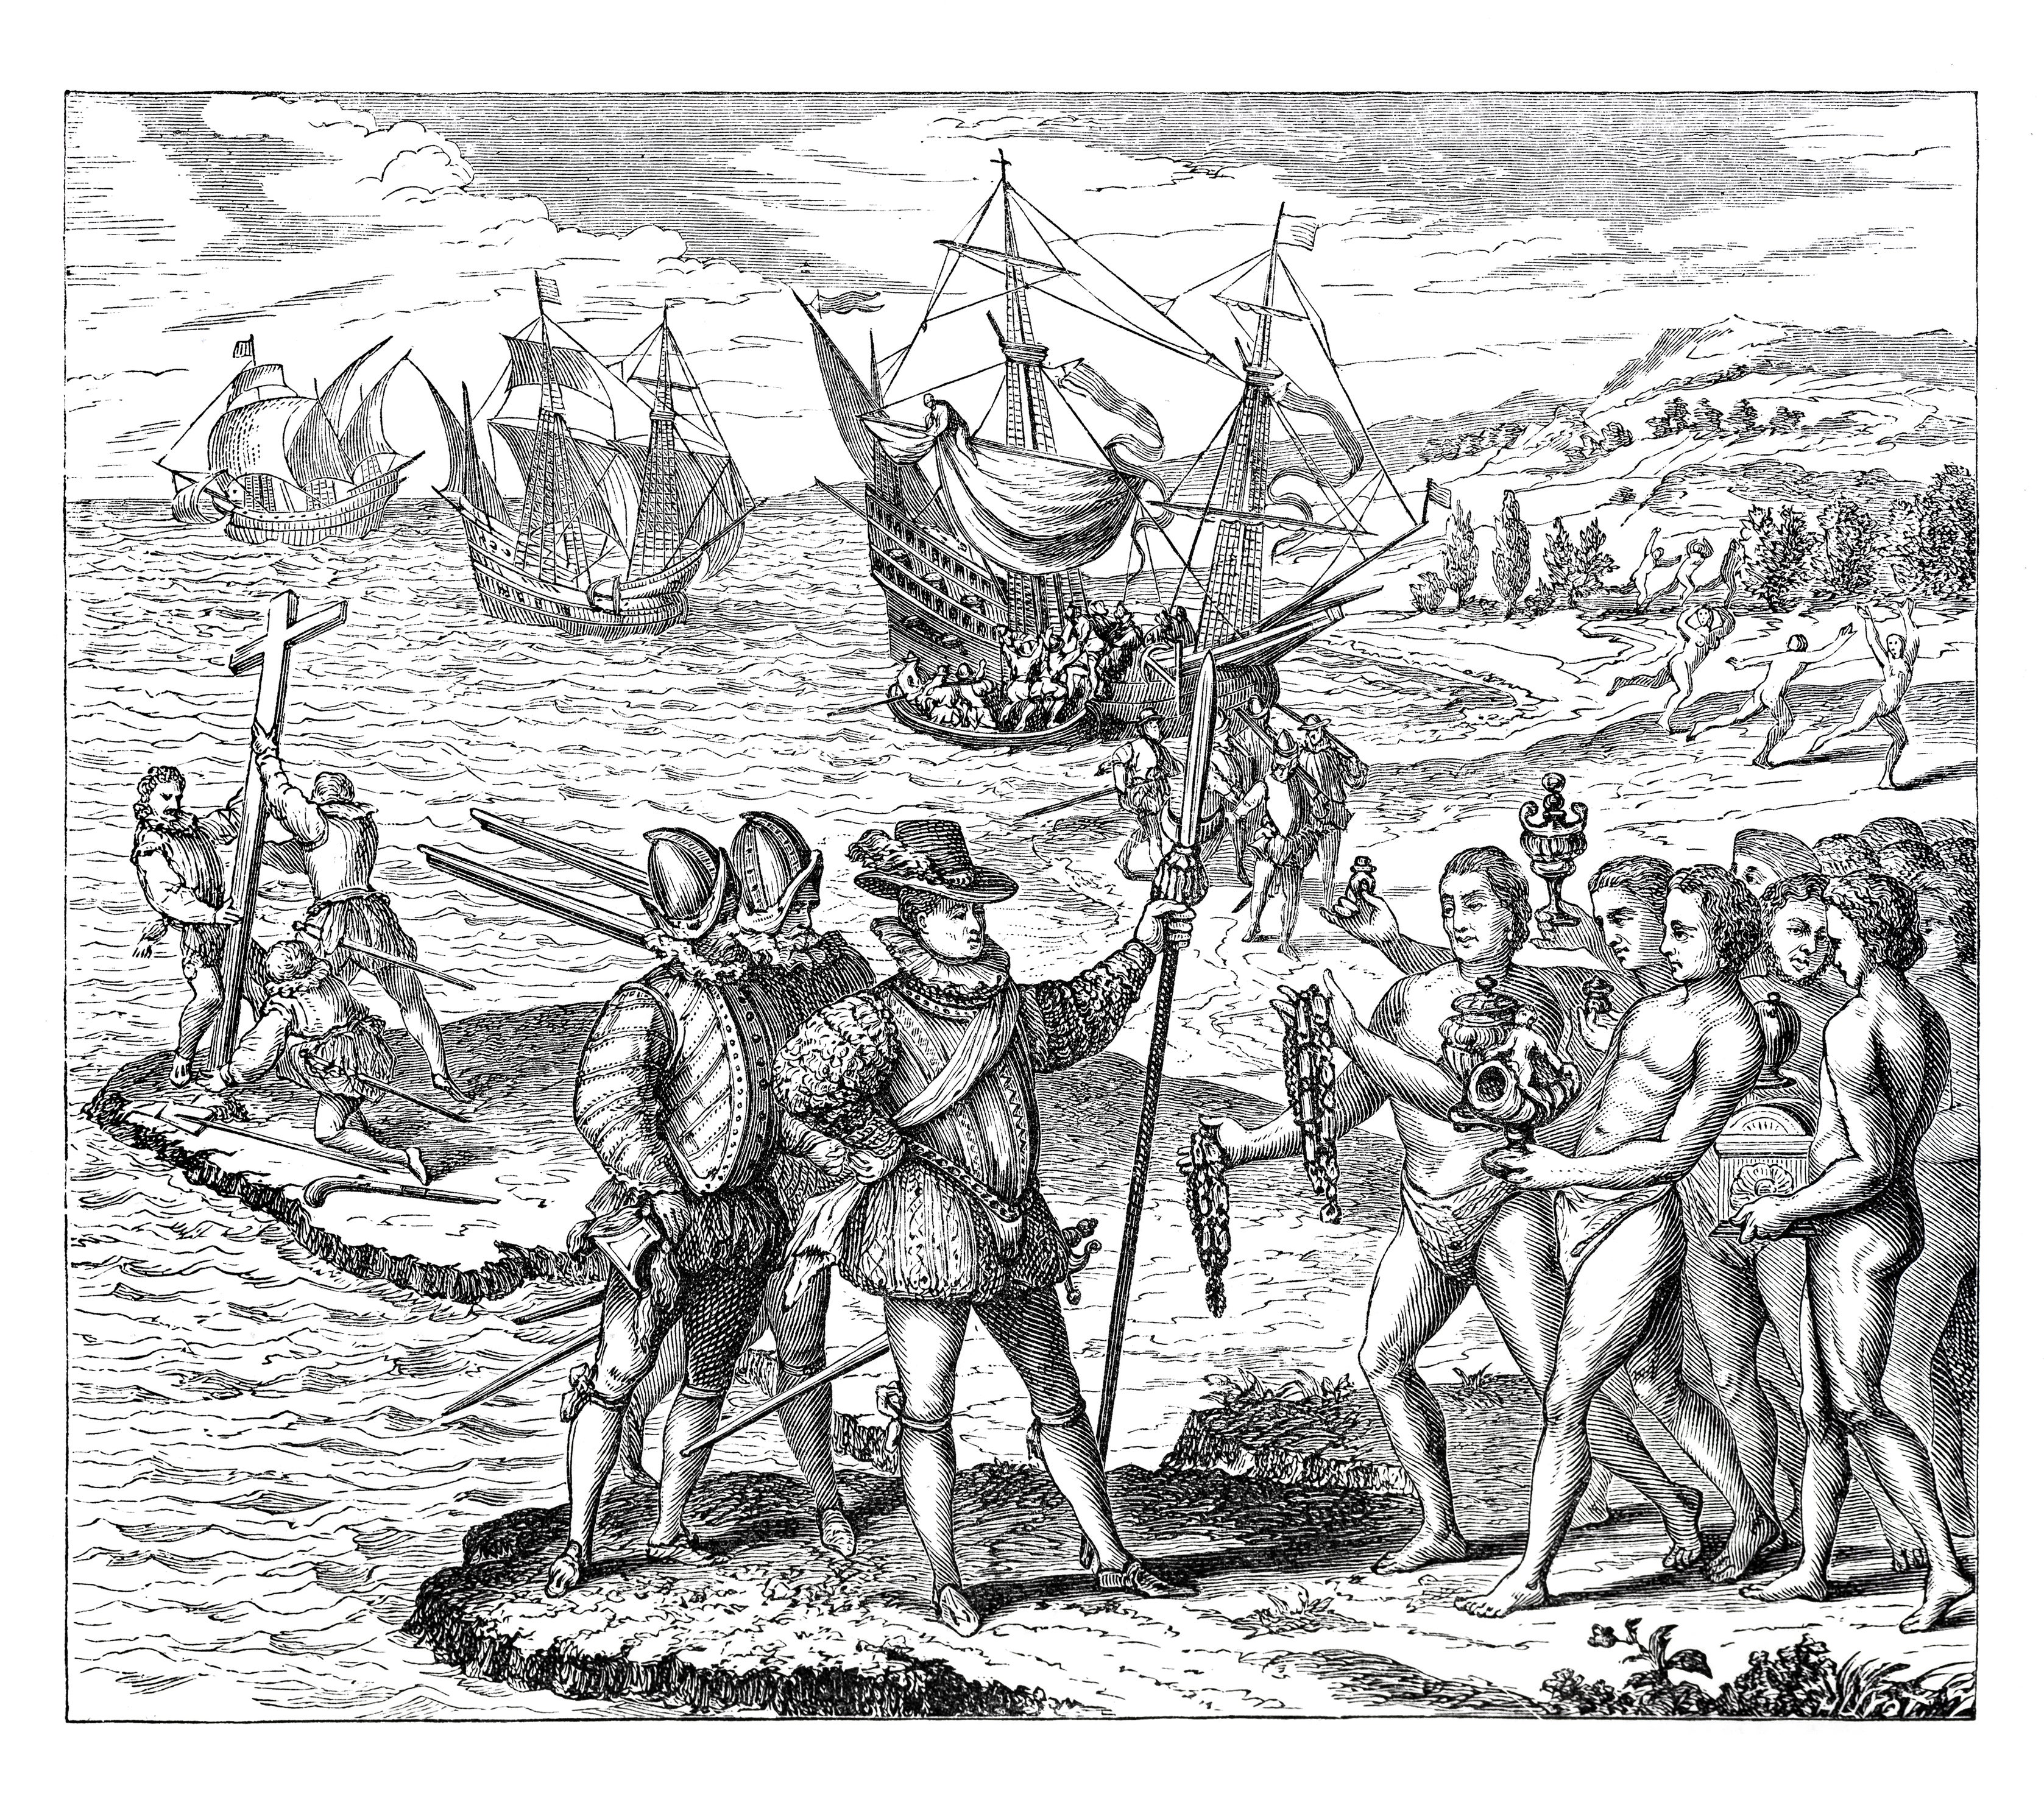 Tomatoes, chillies and a variety of other plants and animals were brought back to Europe after Columbus discovered the Americas